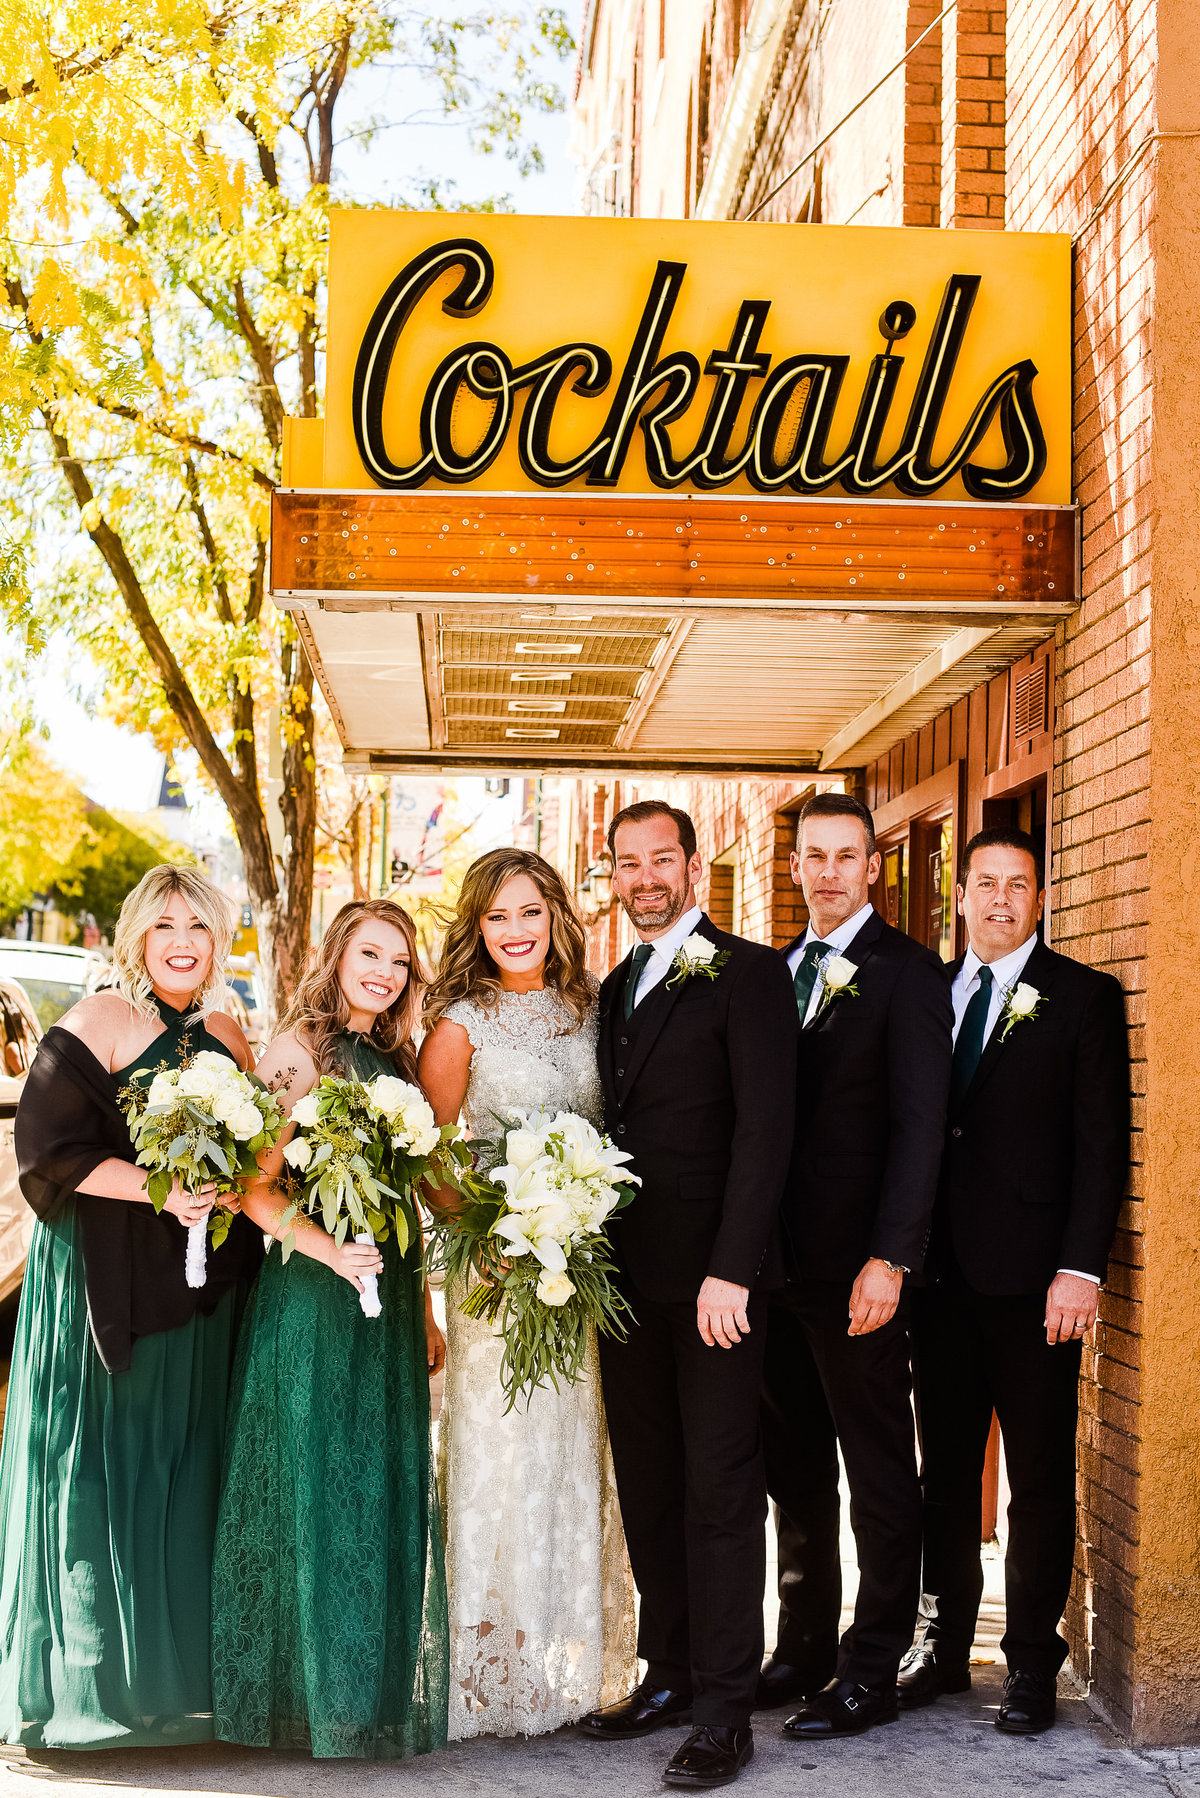 Bride Groom and wedding party bridal downtown Flagstaff smiling wedding